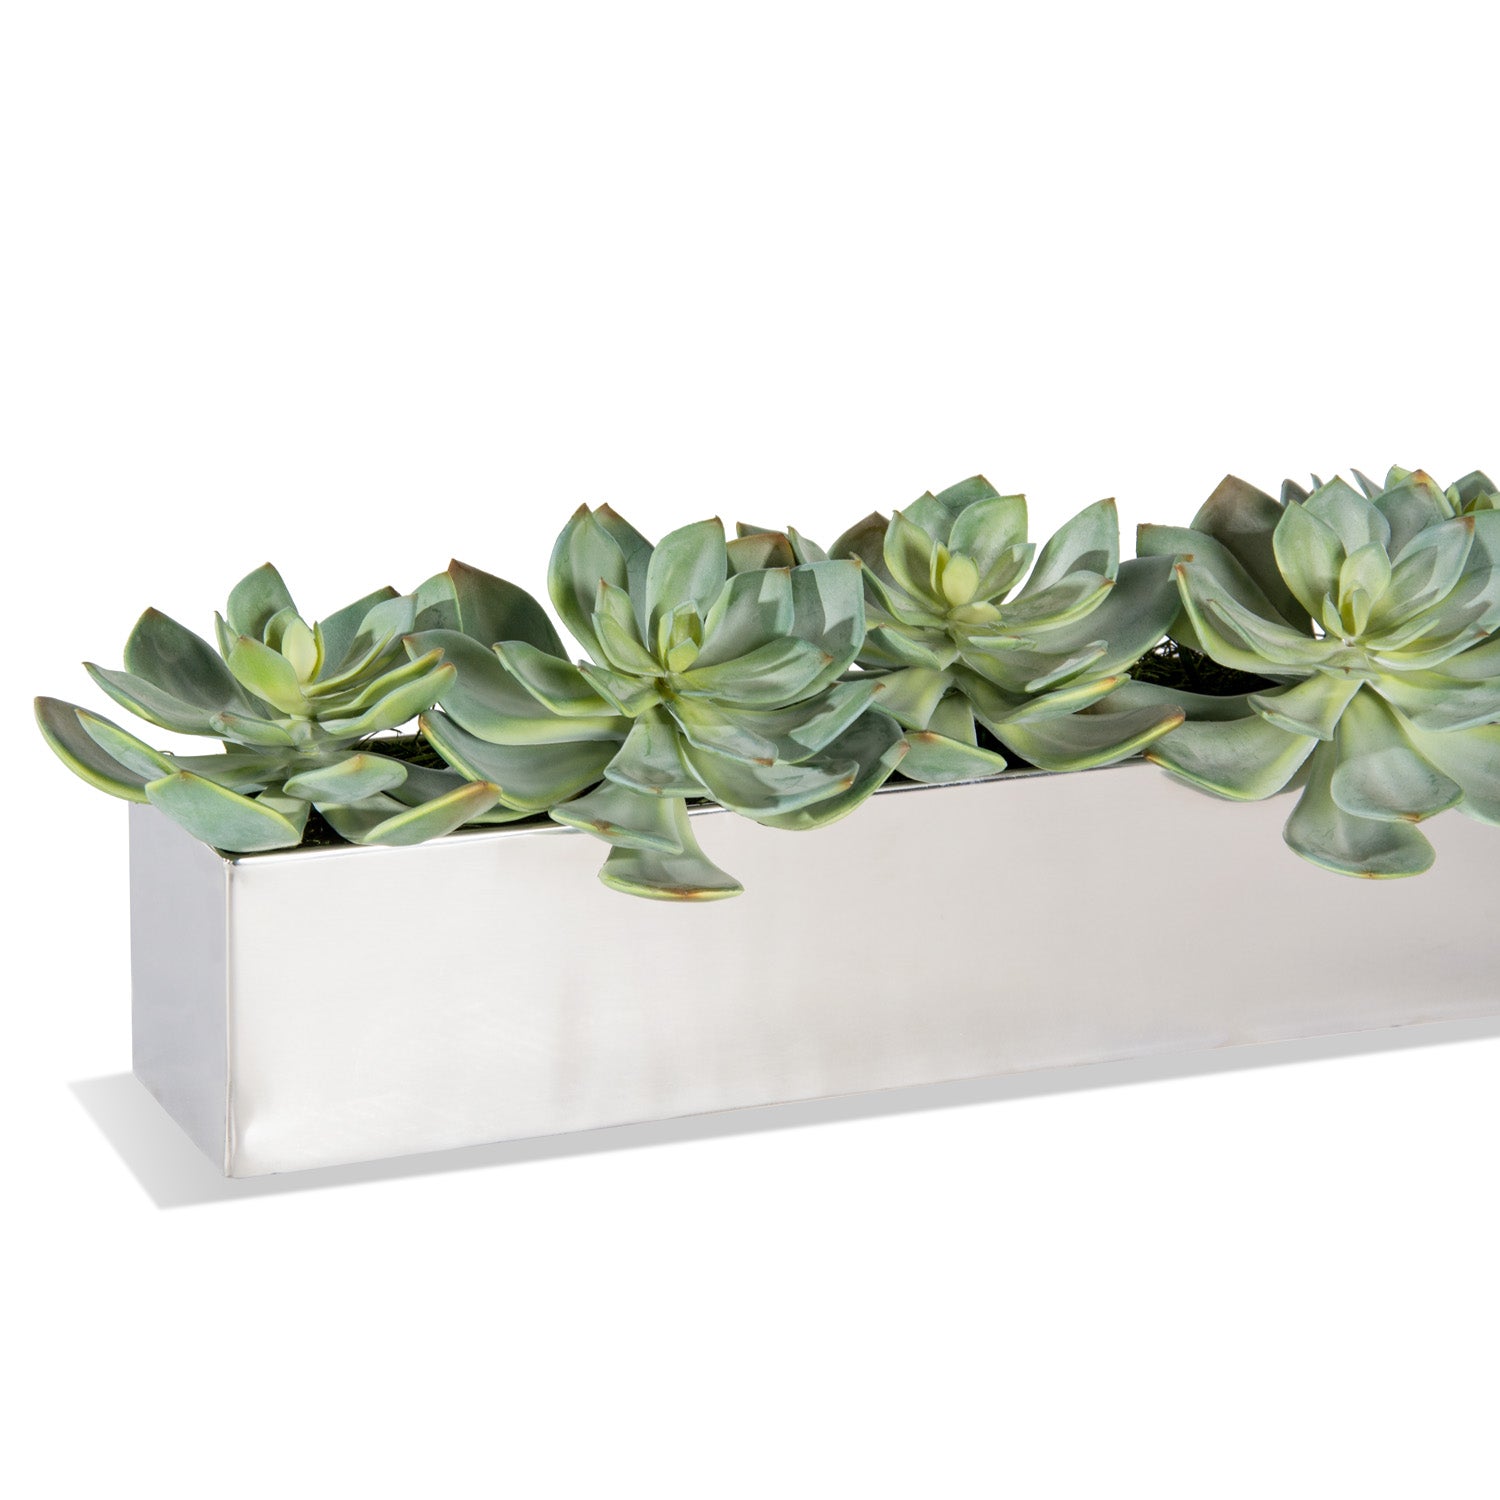 Grapto in Rectangle Stainless Table Planter